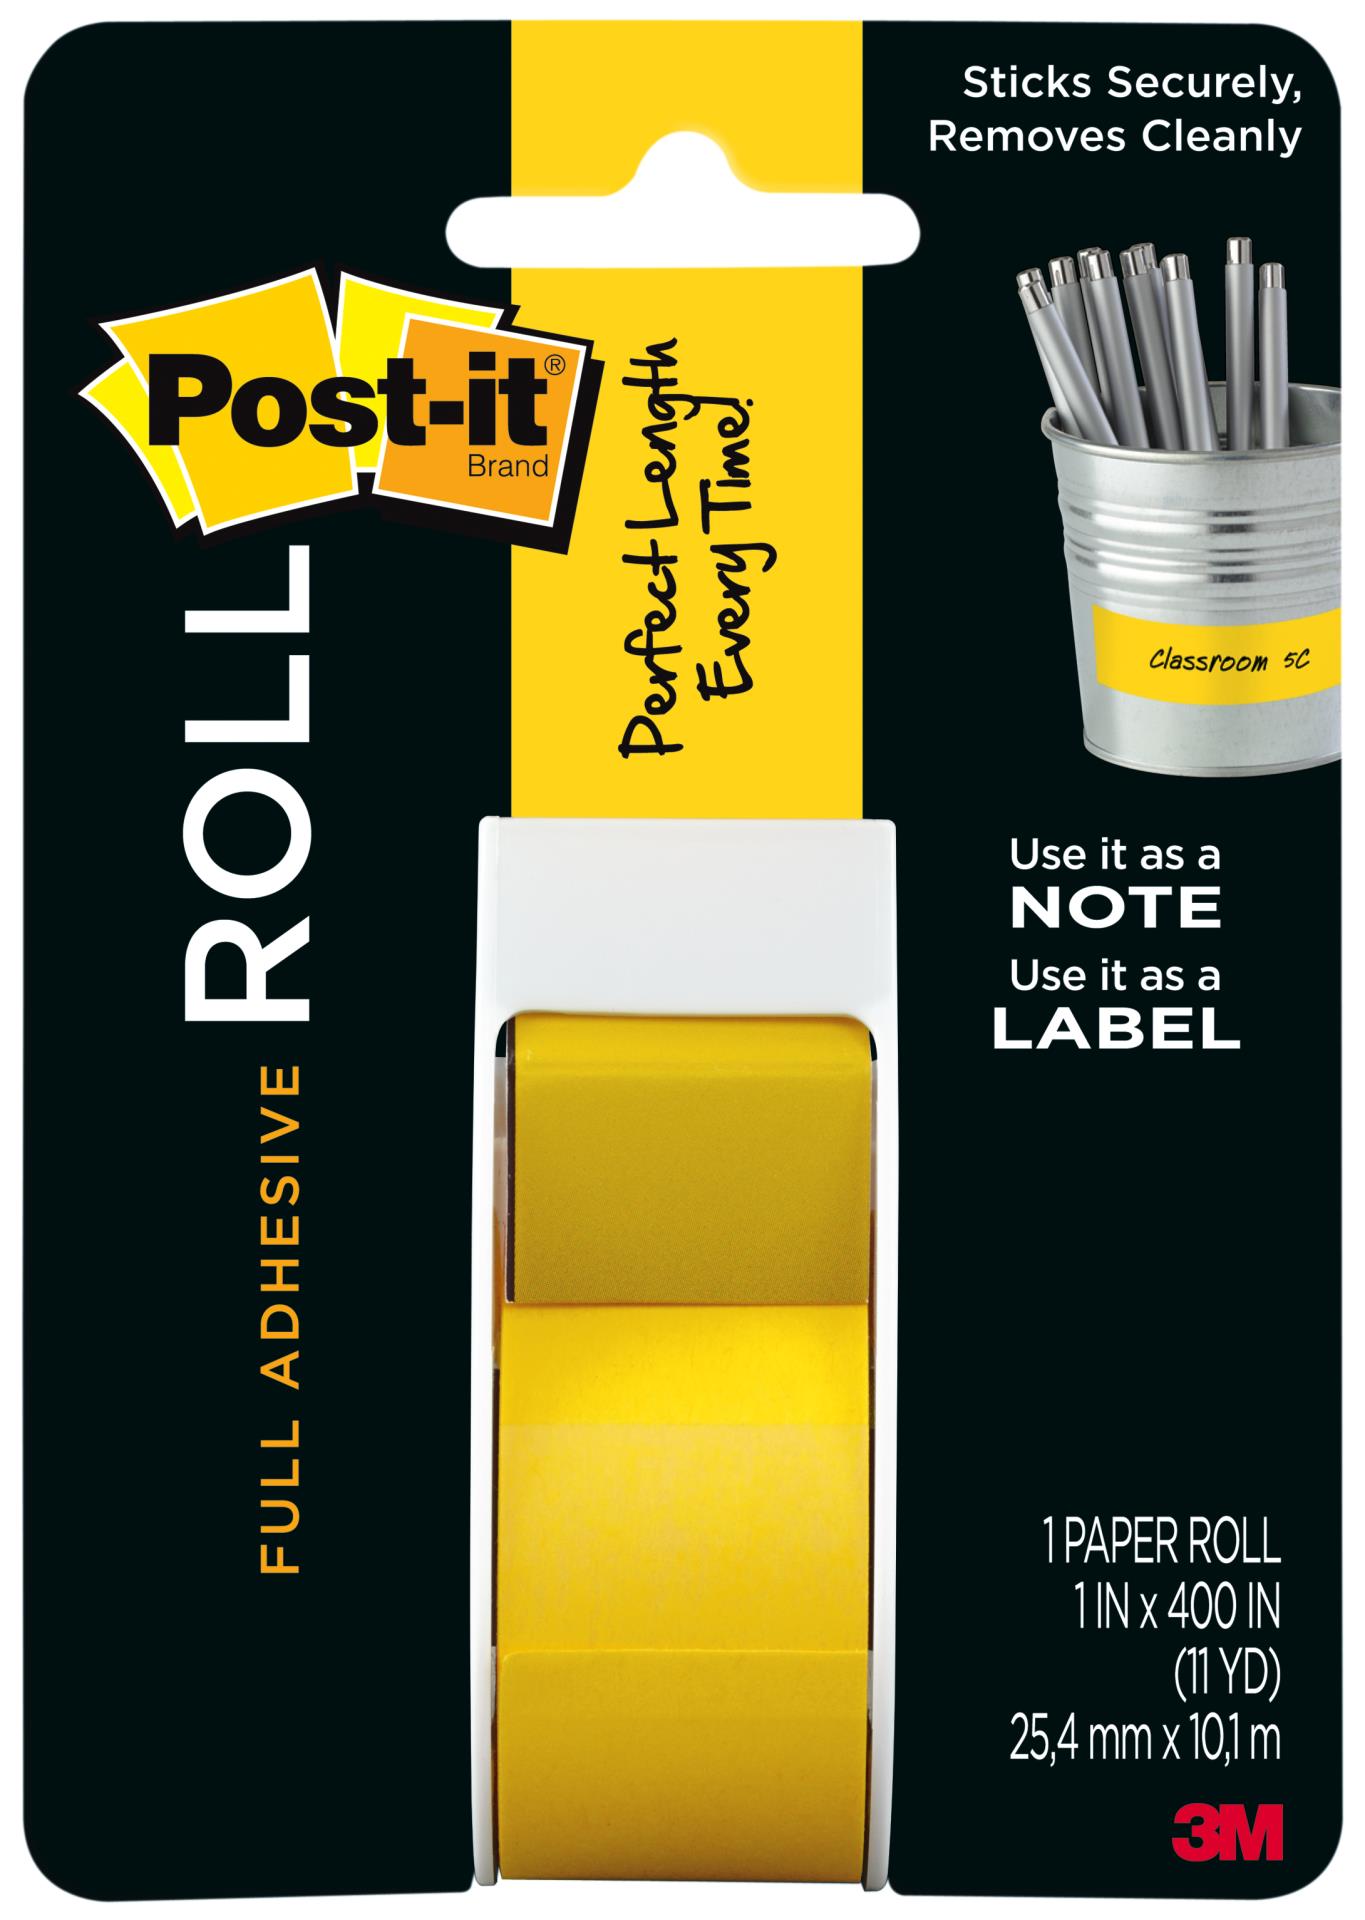 7100030063 - Post-it® Full Adhesive Roll 2650-Y, 1 in. x 400 in. (25,4 mm x 10,1 mm)